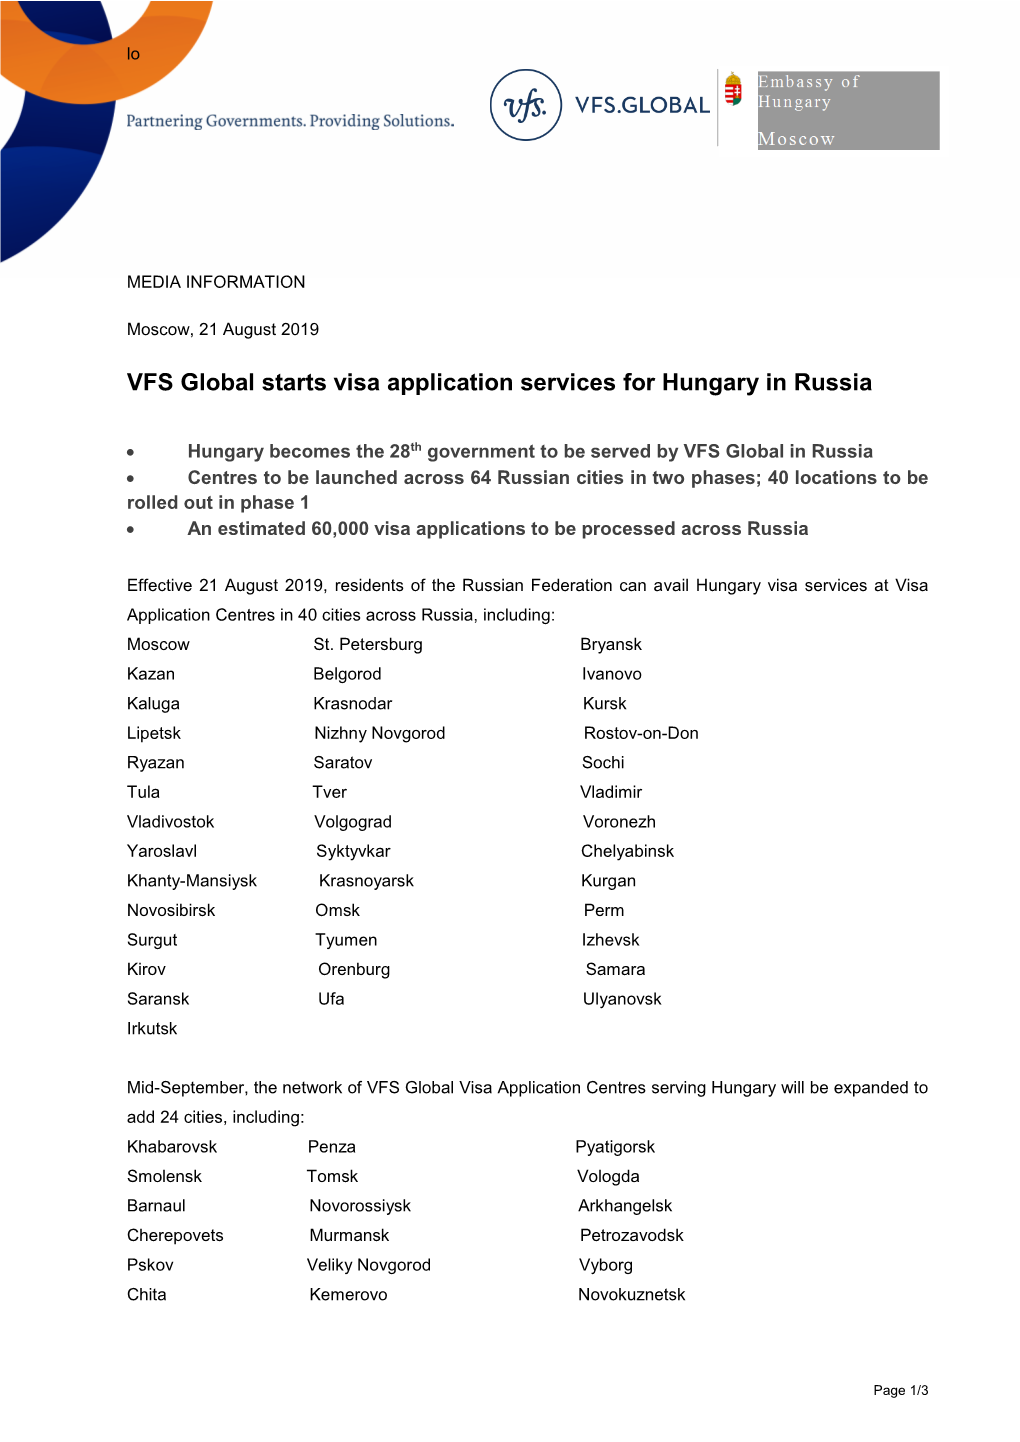 VFS Global Starts Visa Application Services for Hungary in Russia